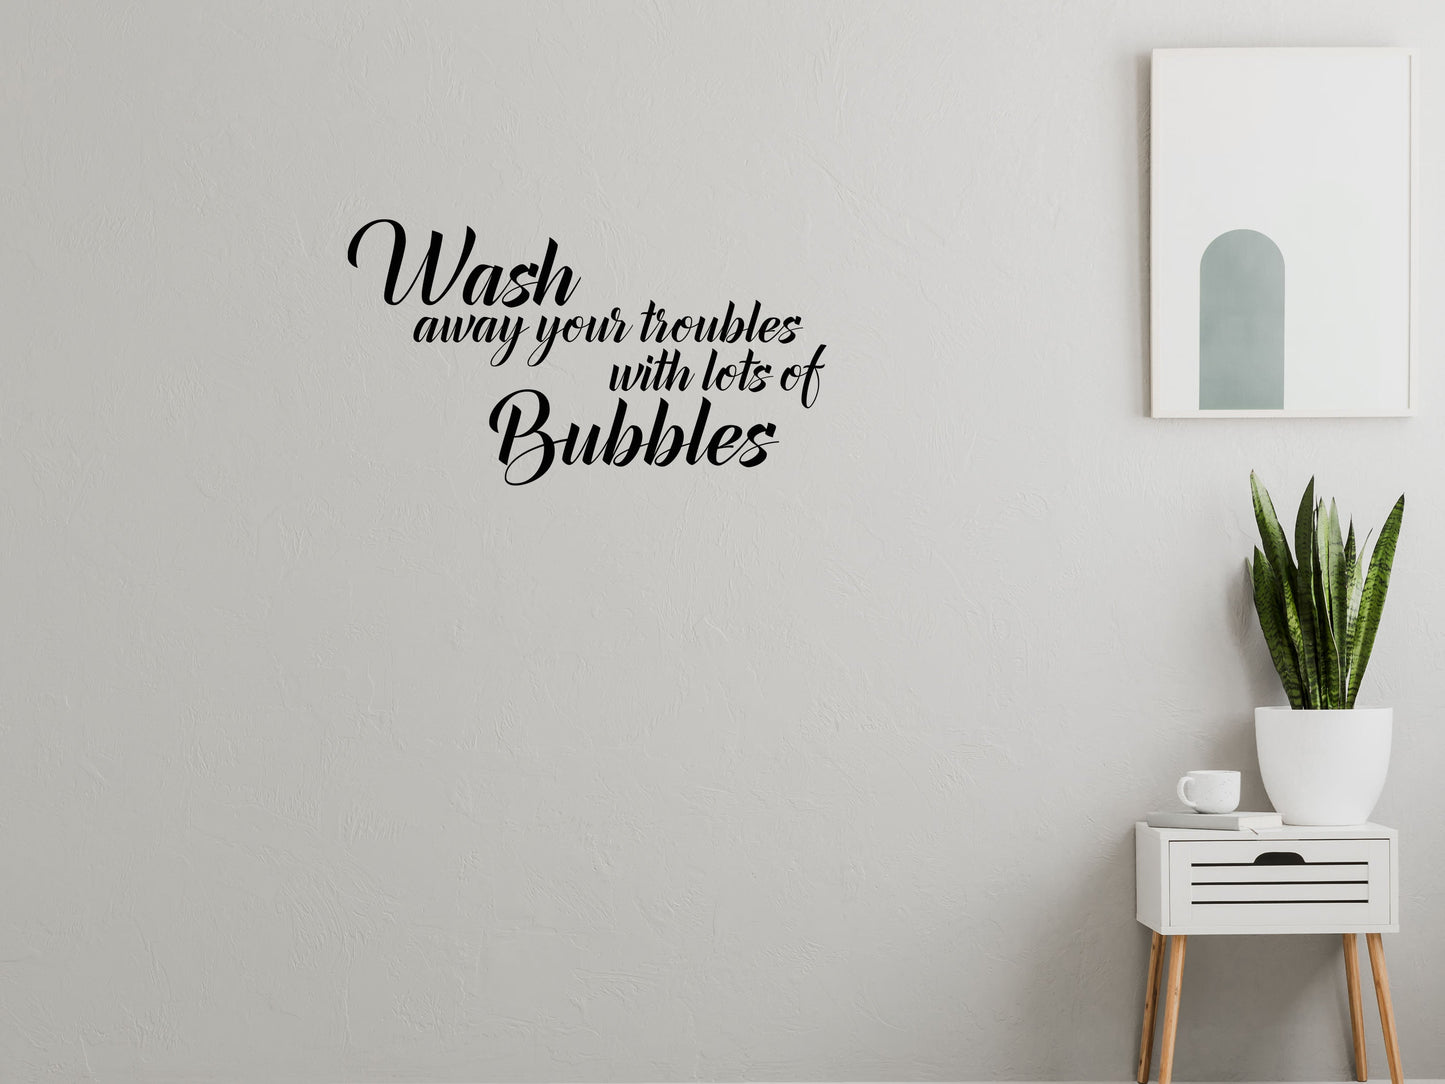 Wash Away Your Troubles - Inspirational Wall Decals Vinyl Wall Decal Inspirational Wall Signs 